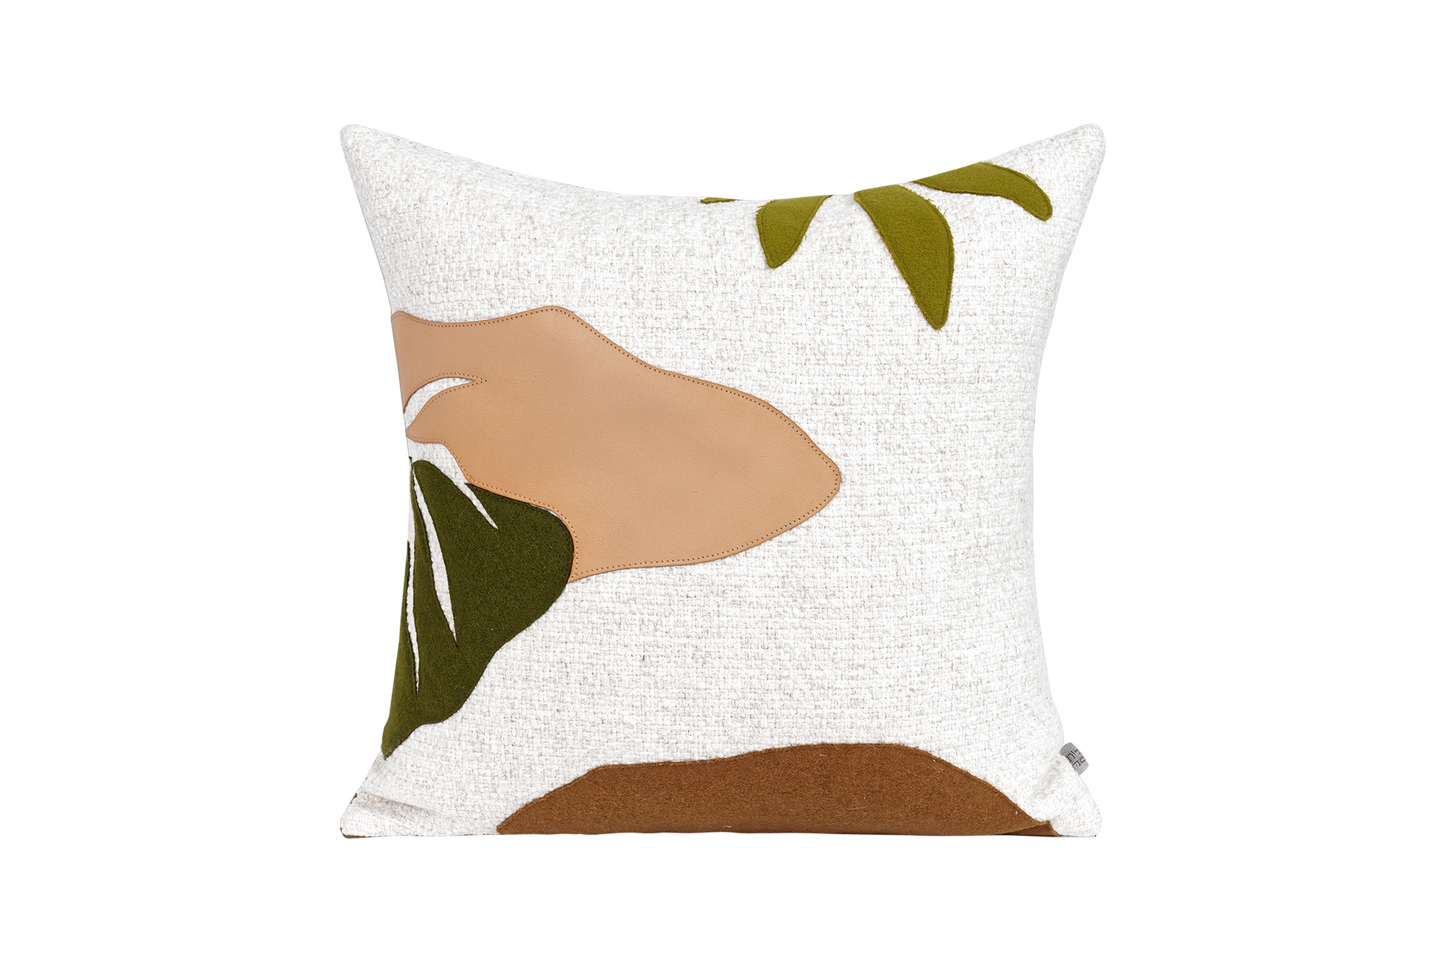 Forest Pattern Square Accent Pillow Cushion Cover & Insert for Decorative Living Room Bedroom 45X45cm